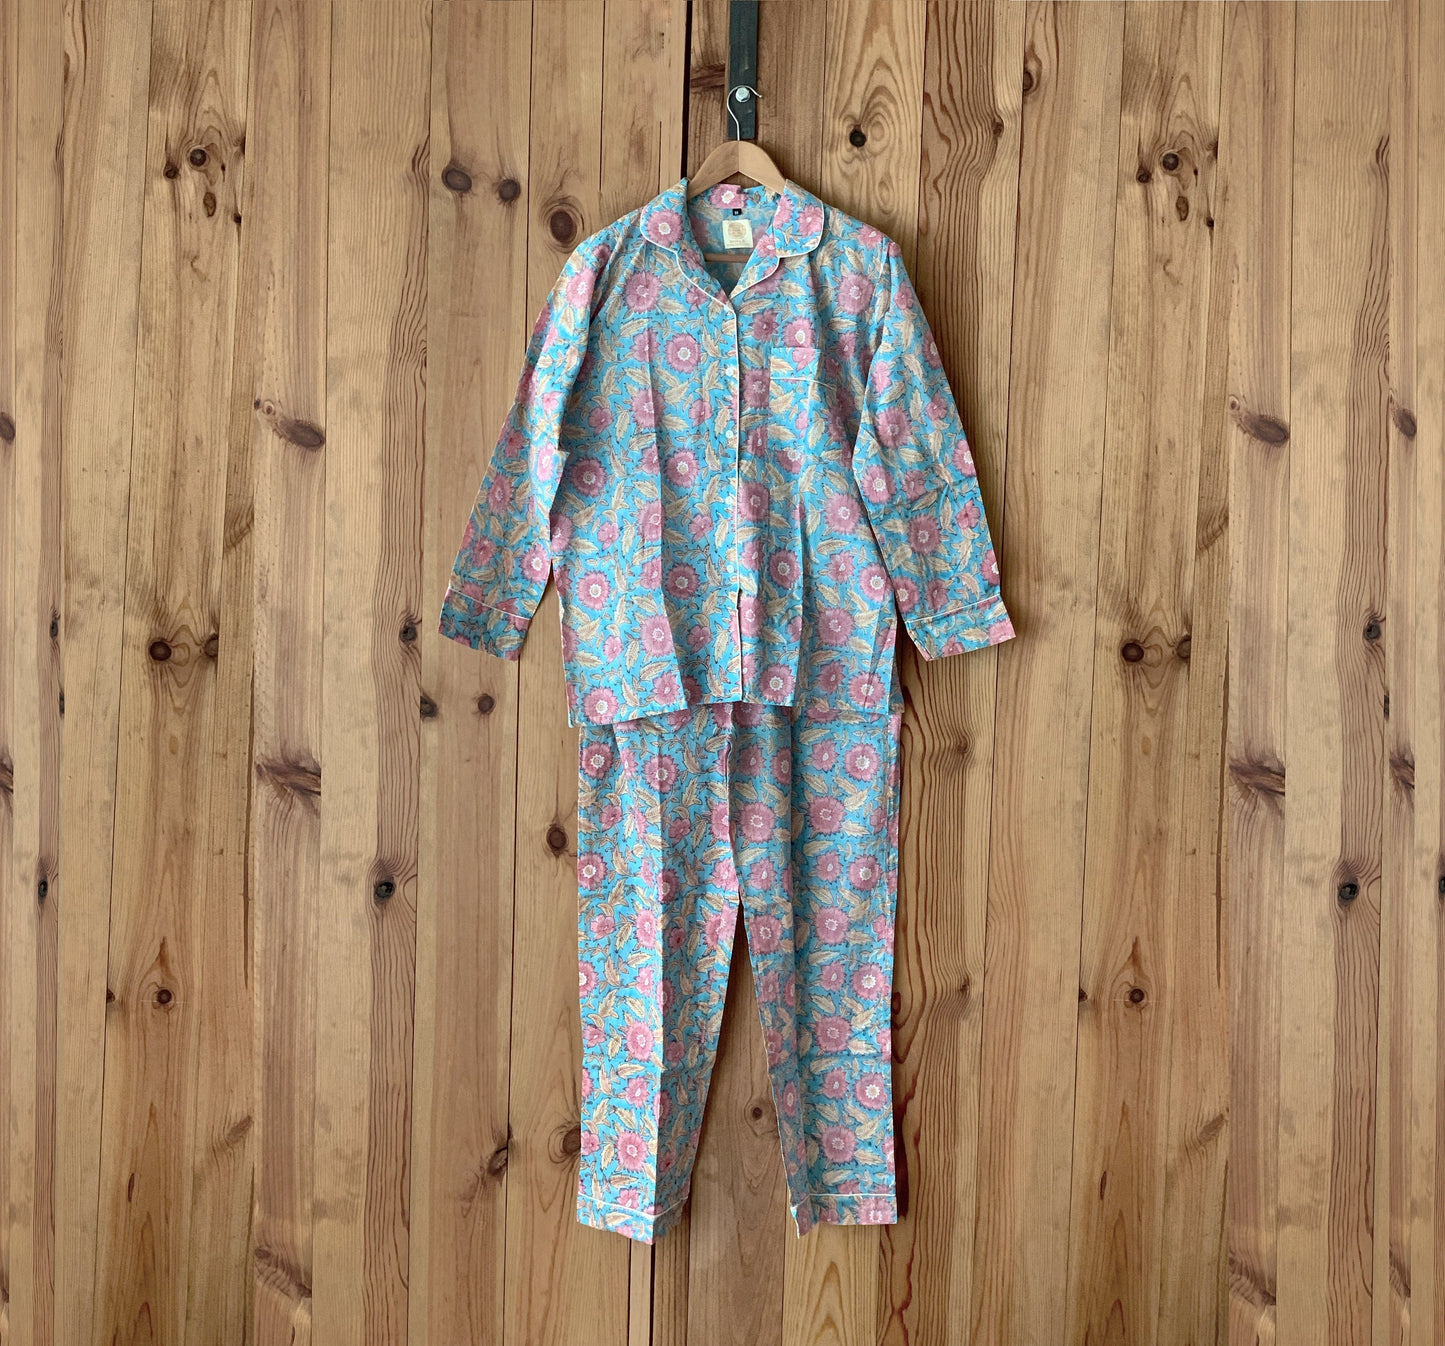 Long-sleeved pajamas and pants · Pure cotton block print handmade in India · 100% cotton winter pajamas · Turquoise pink flowers